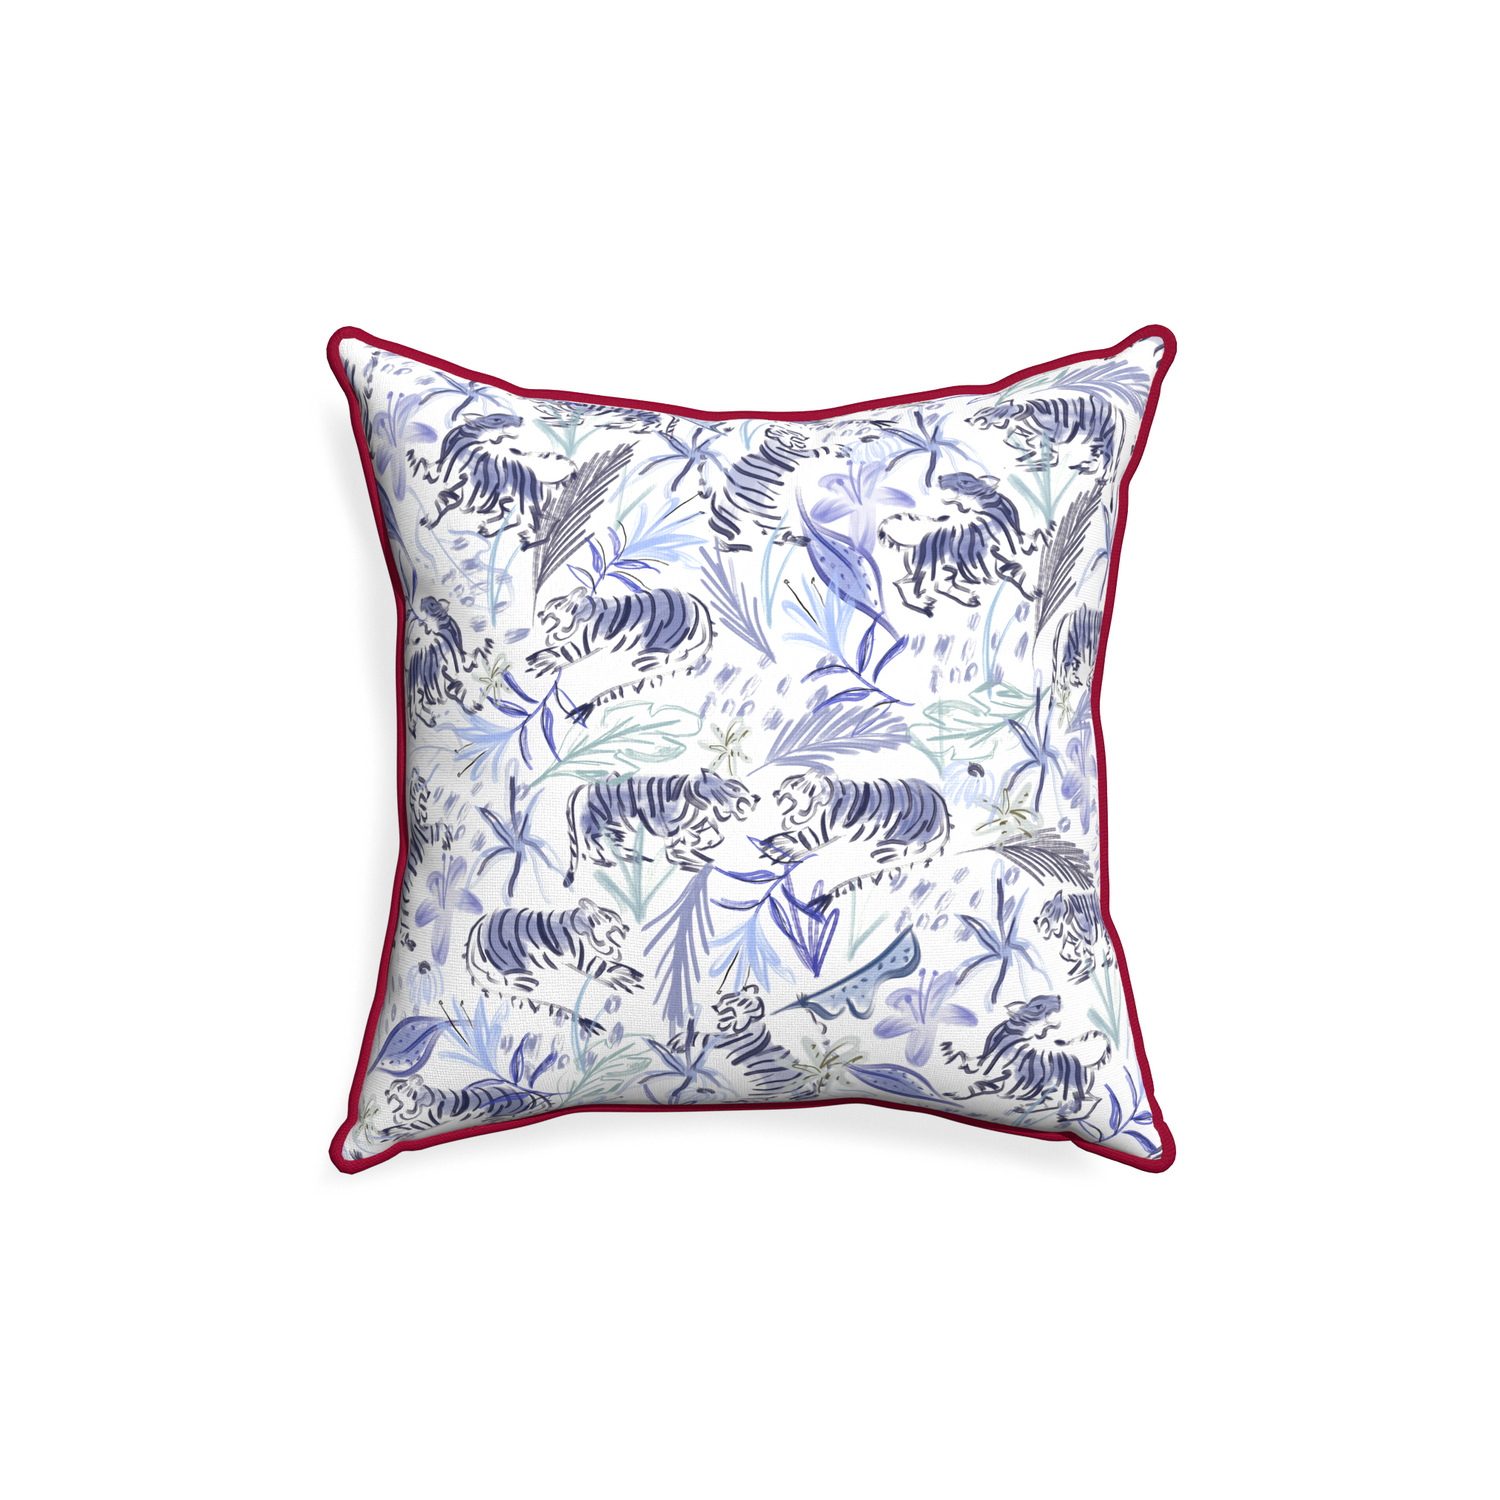 18-square frida blue custom blue with intricate tiger designpillow with raspberry piping on white background